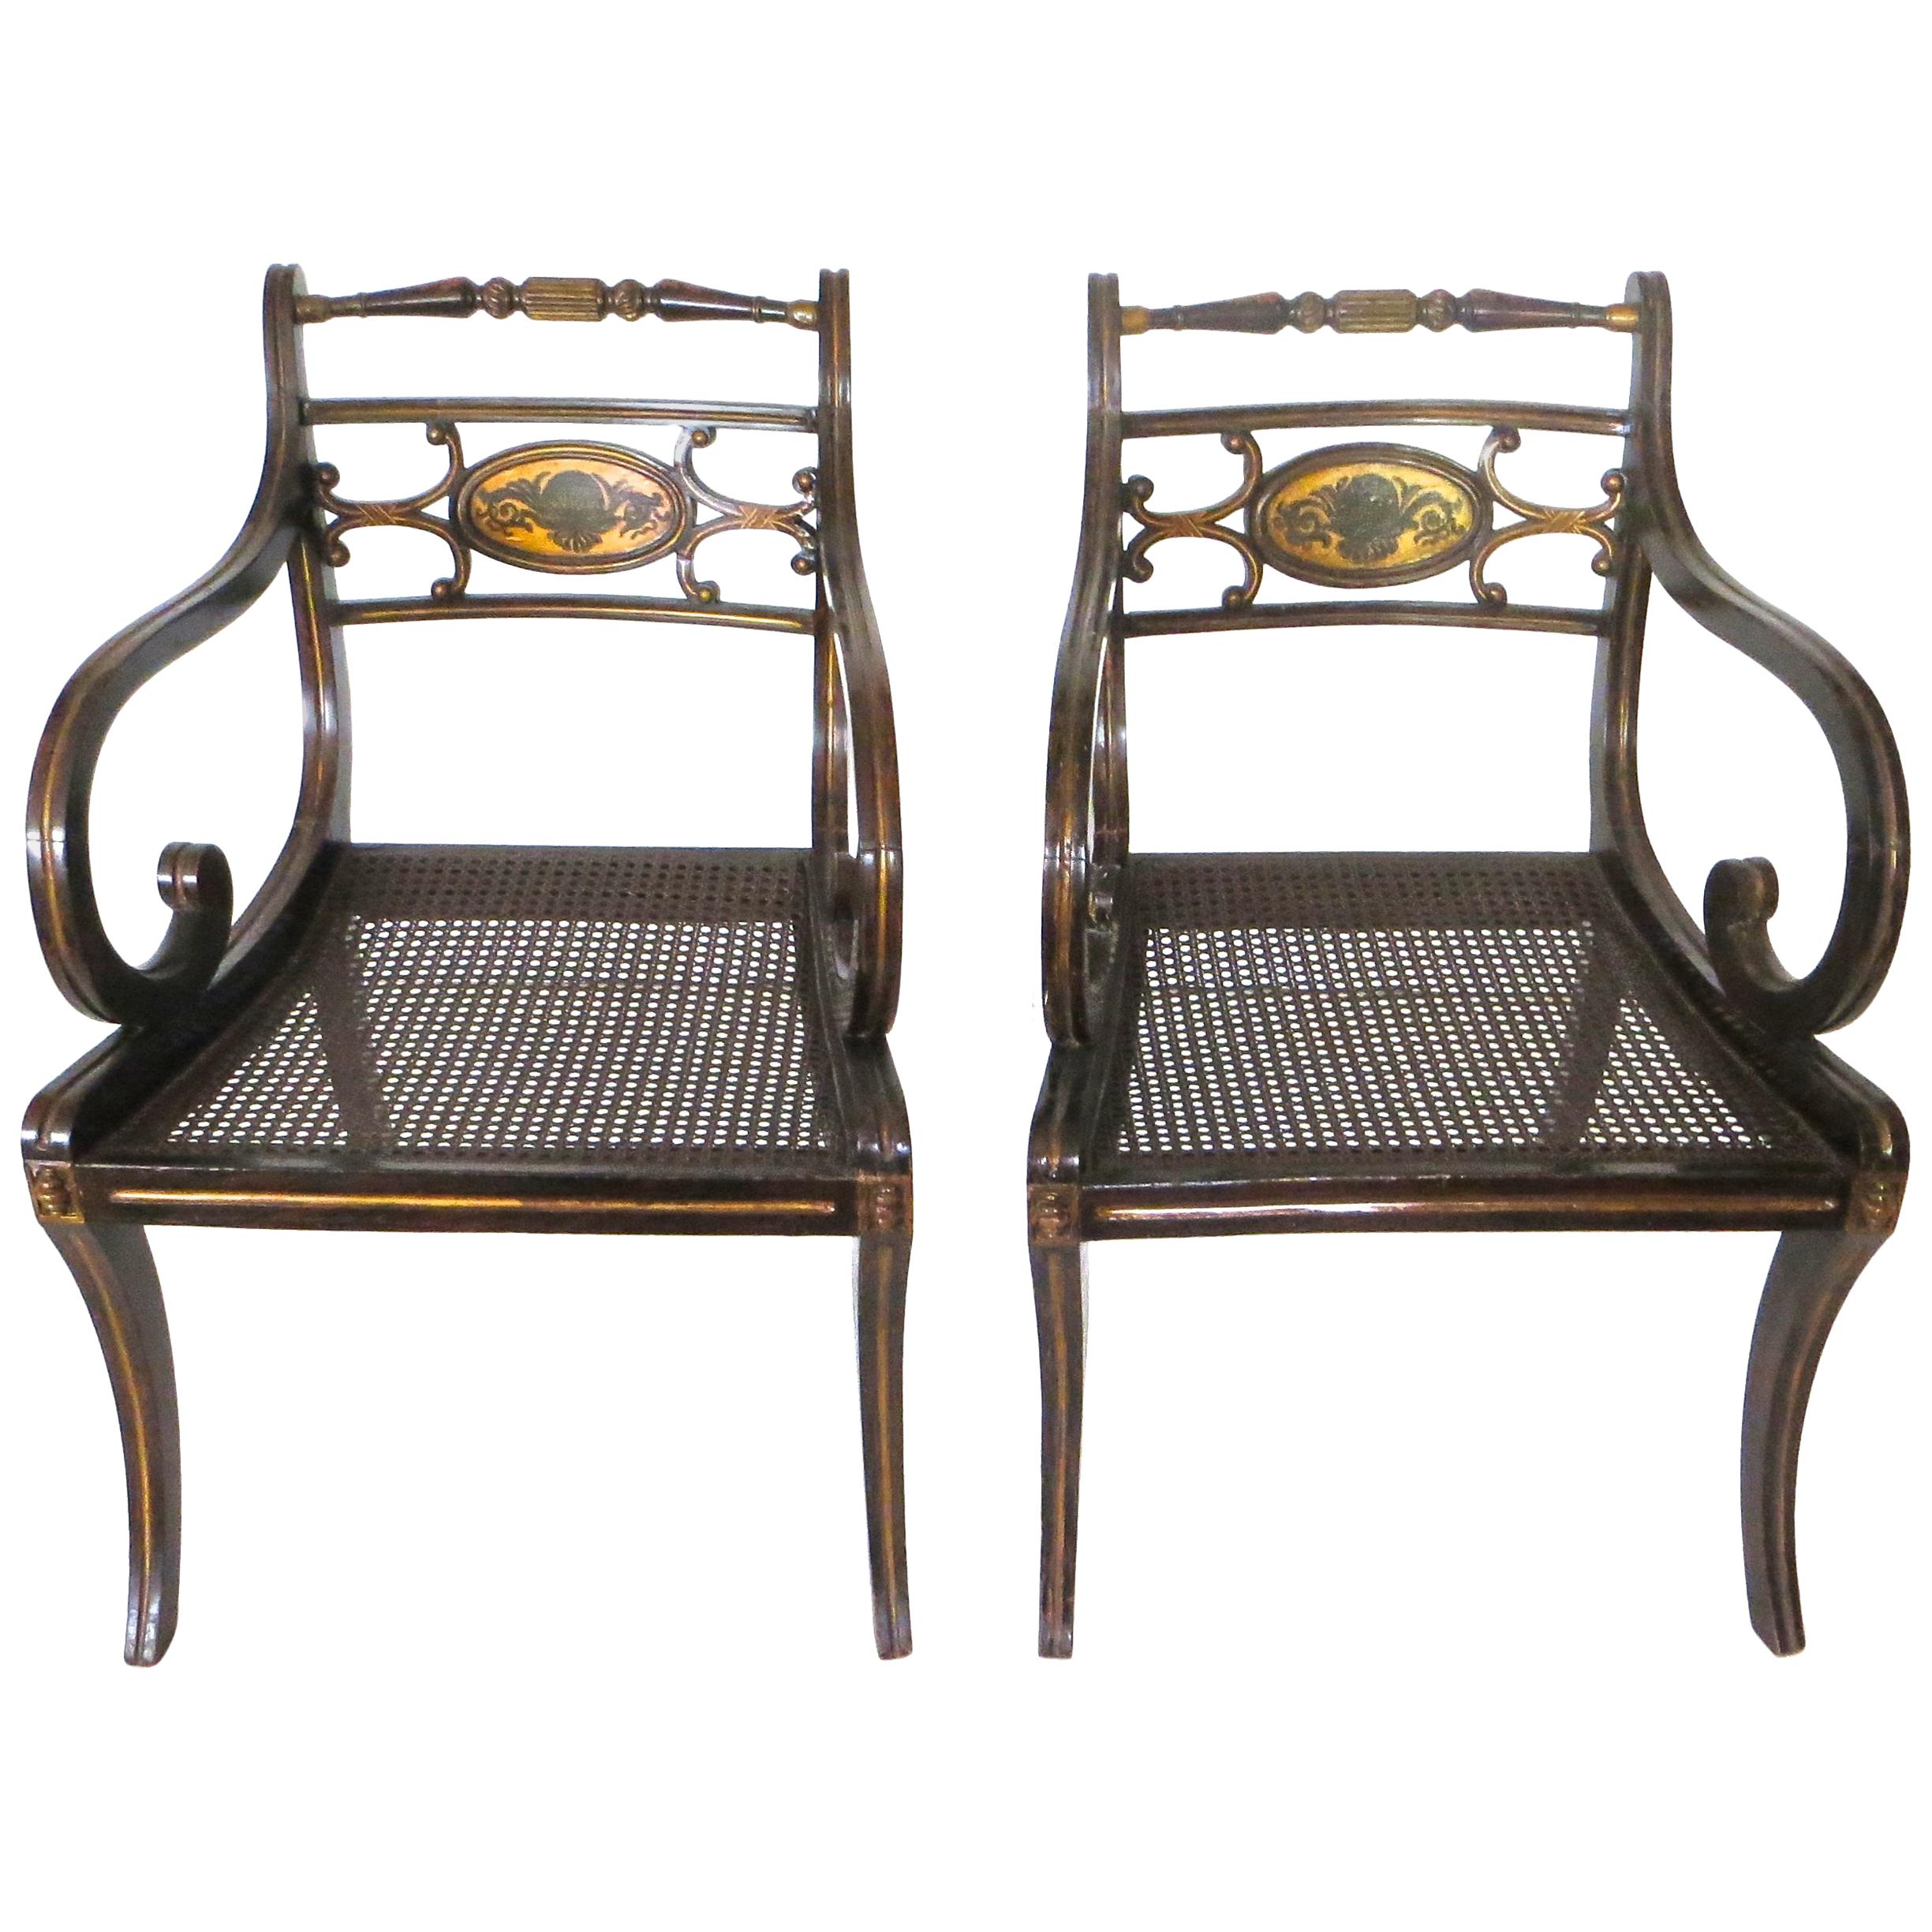 Pair of Regency Faux Rosewood Japanned and Parcel Gilt Armchairs, circa 1810